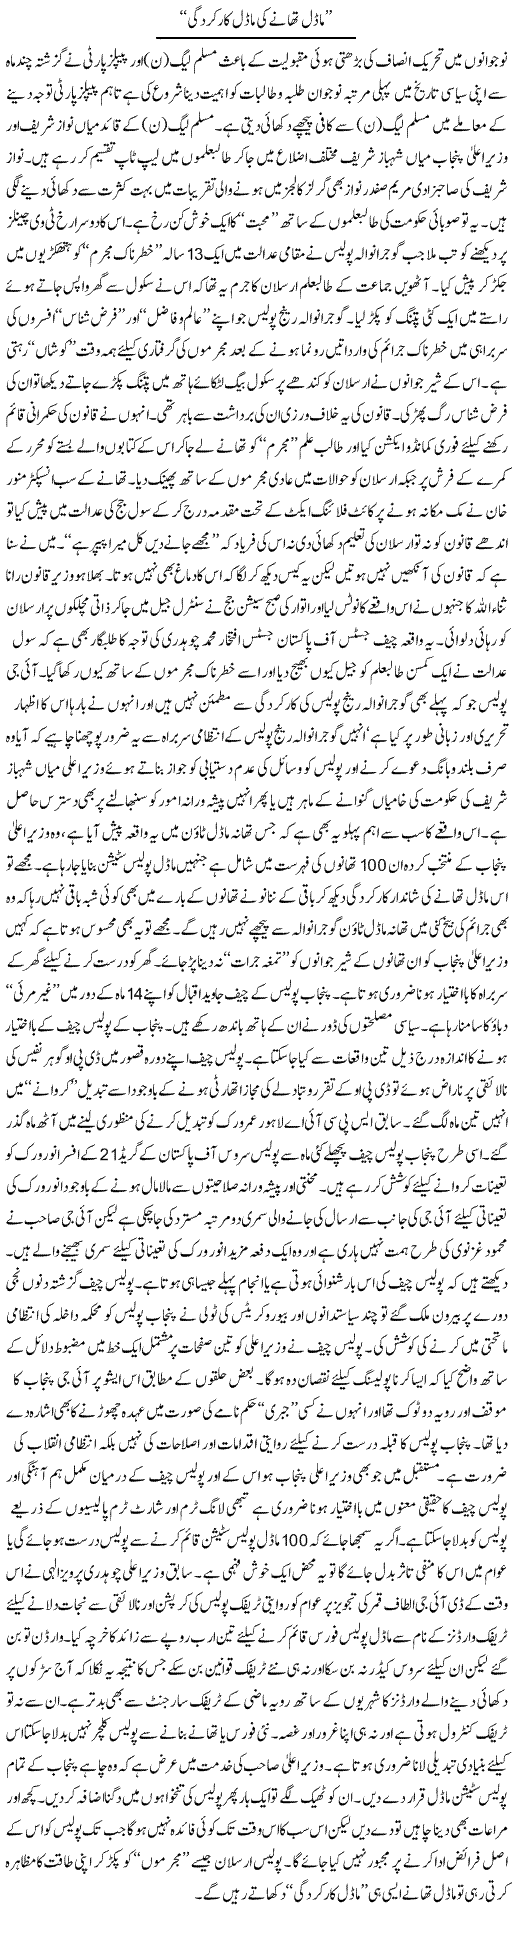 Students and Police Express Column Rizwan Asif 13 February 2012